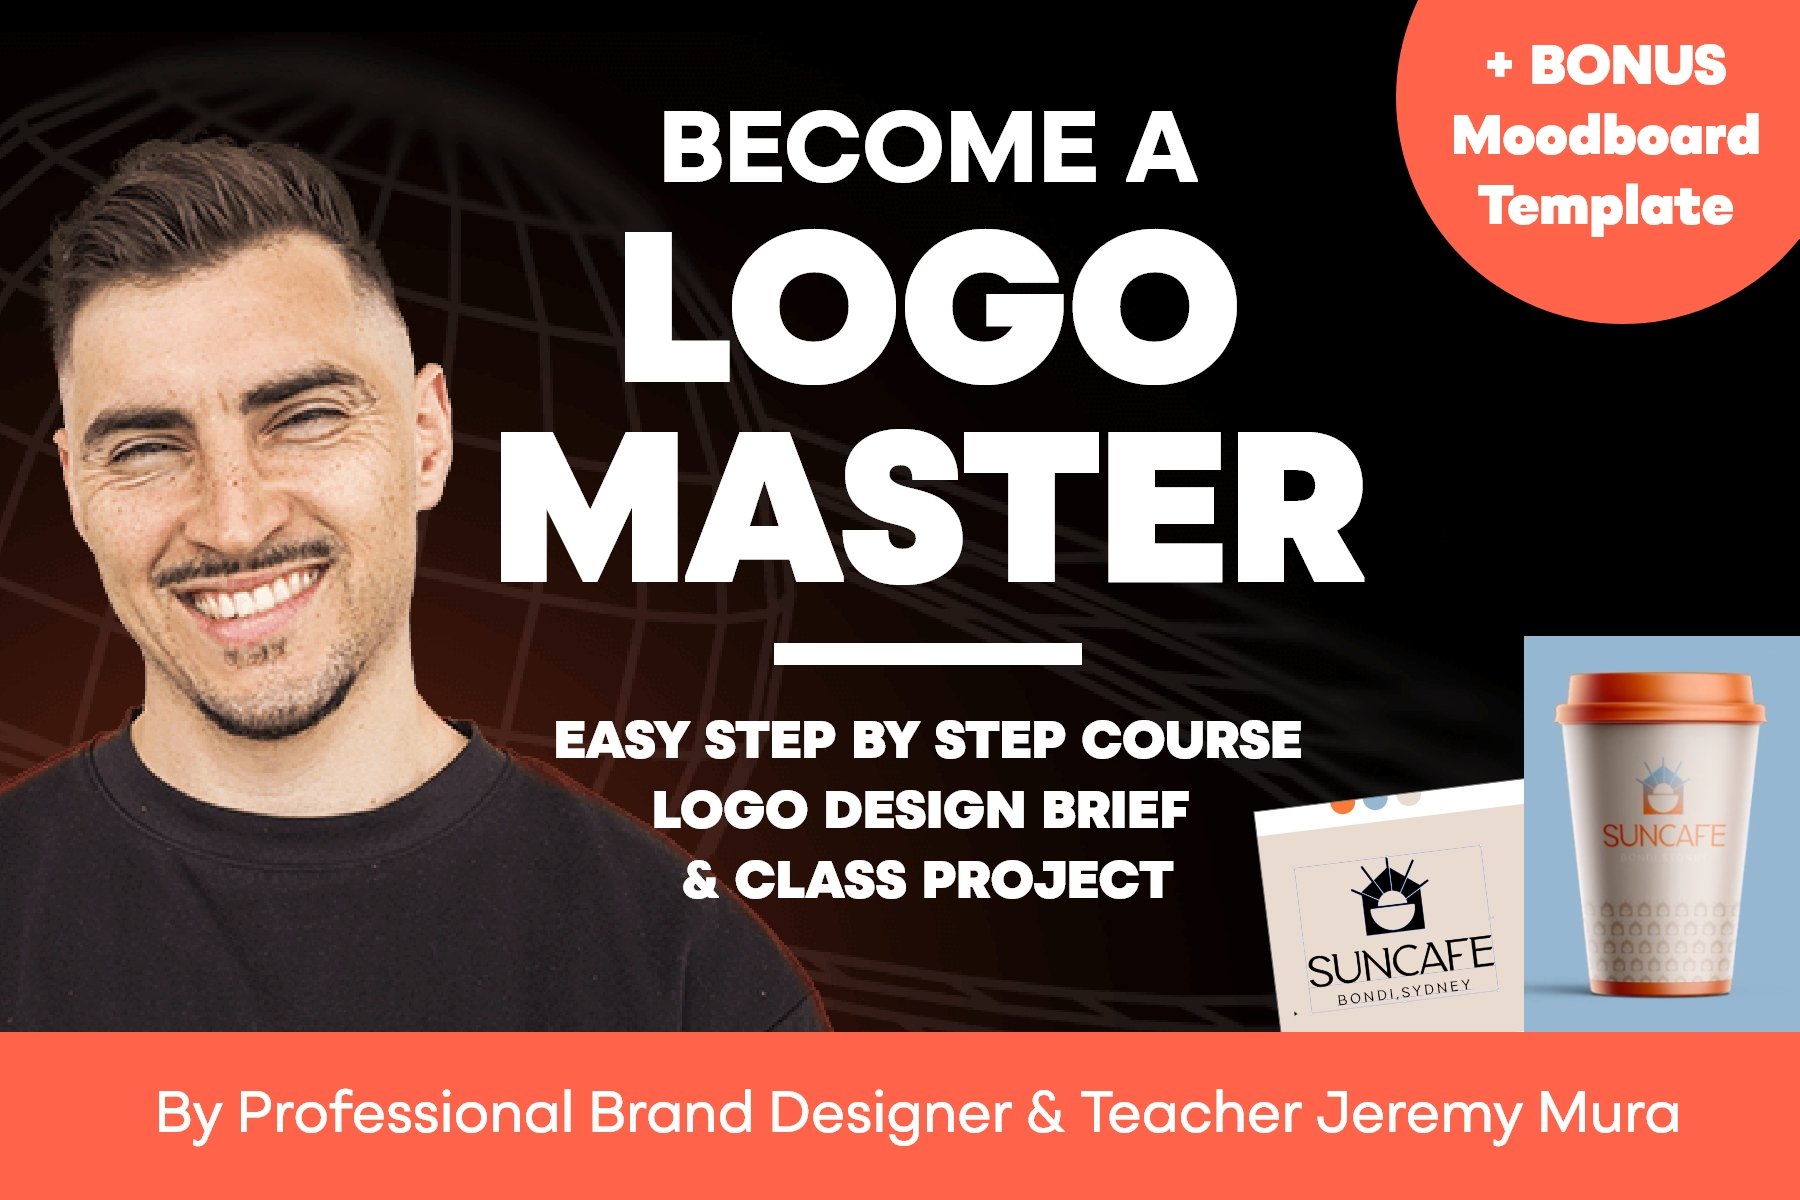 Become A Logo Master - Complete Process In Quick & Easy Steps